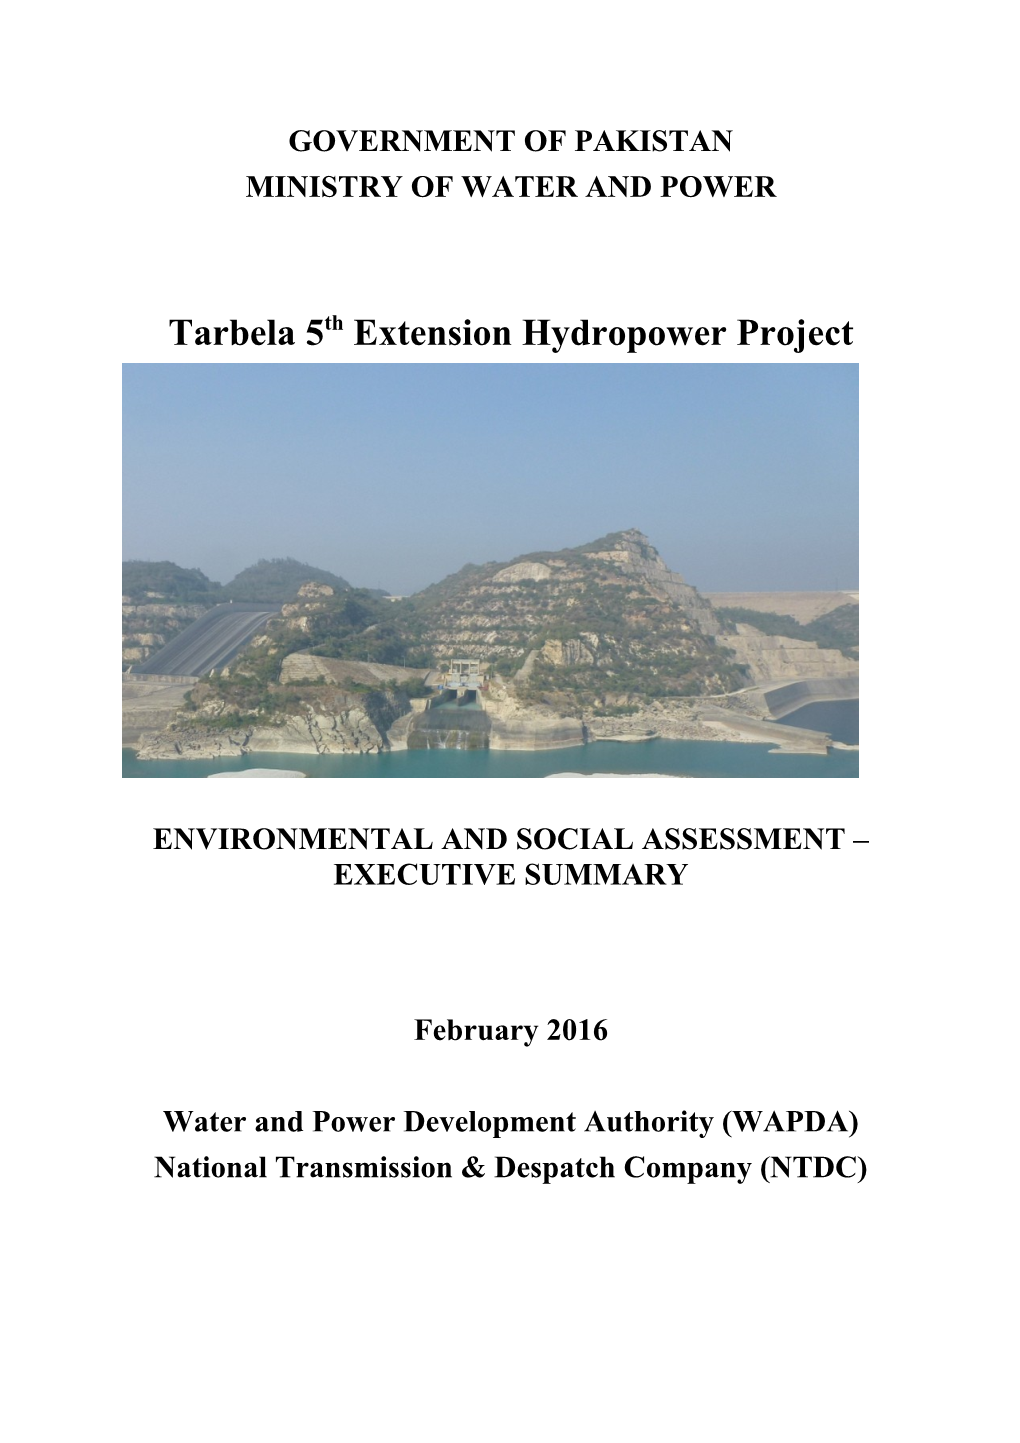 Tarbela Fith Extension Project